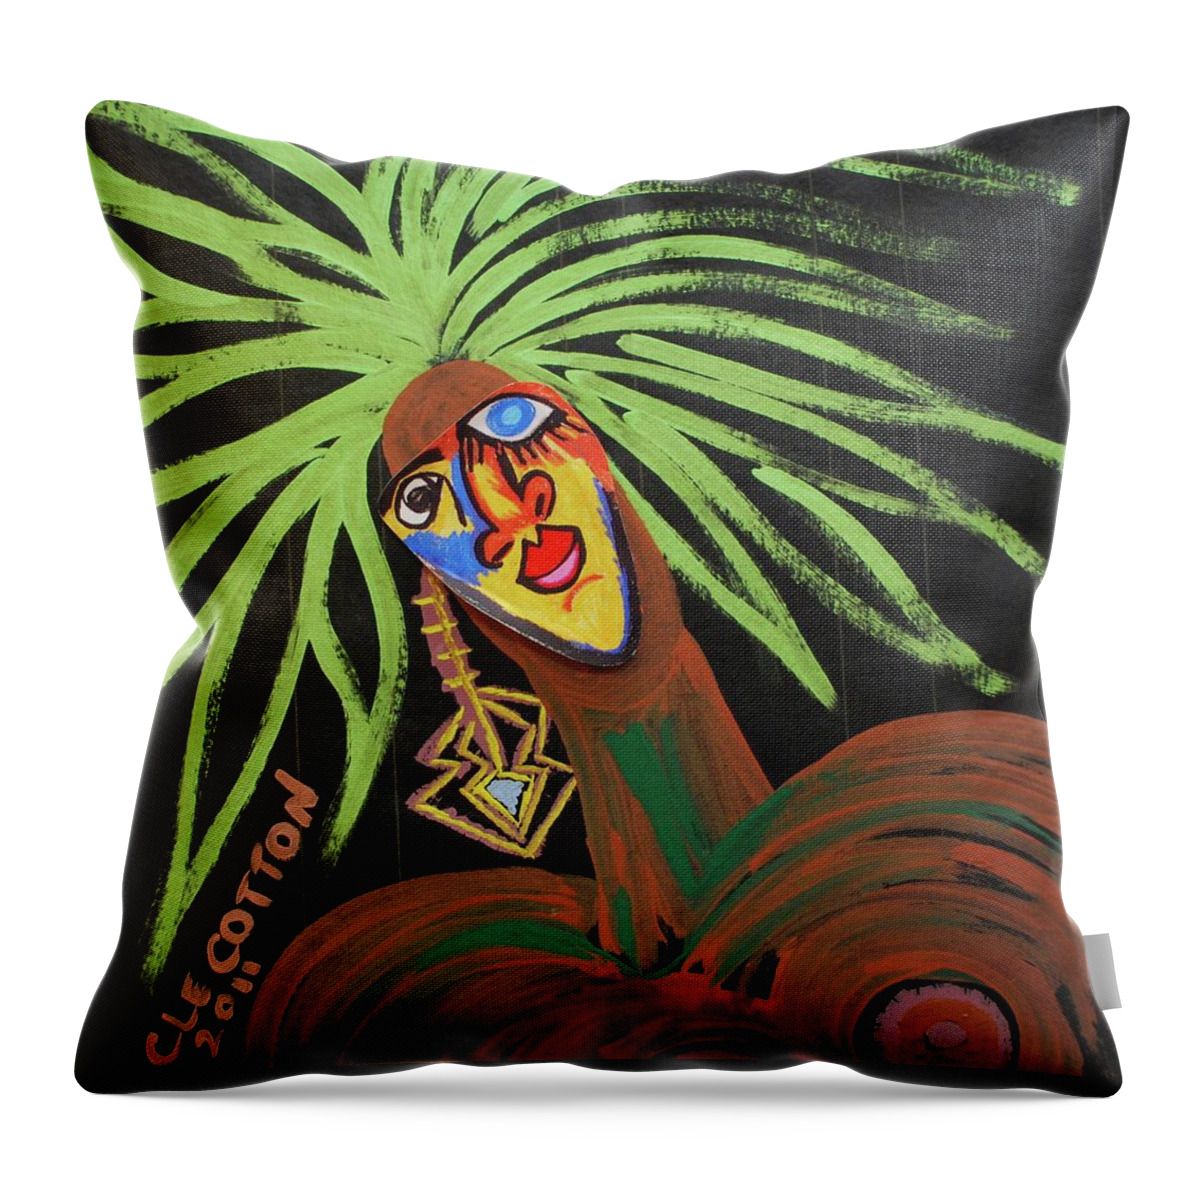  Throw Pillow featuring the painting Cover Up Girl #2 by Cleaster Cotton